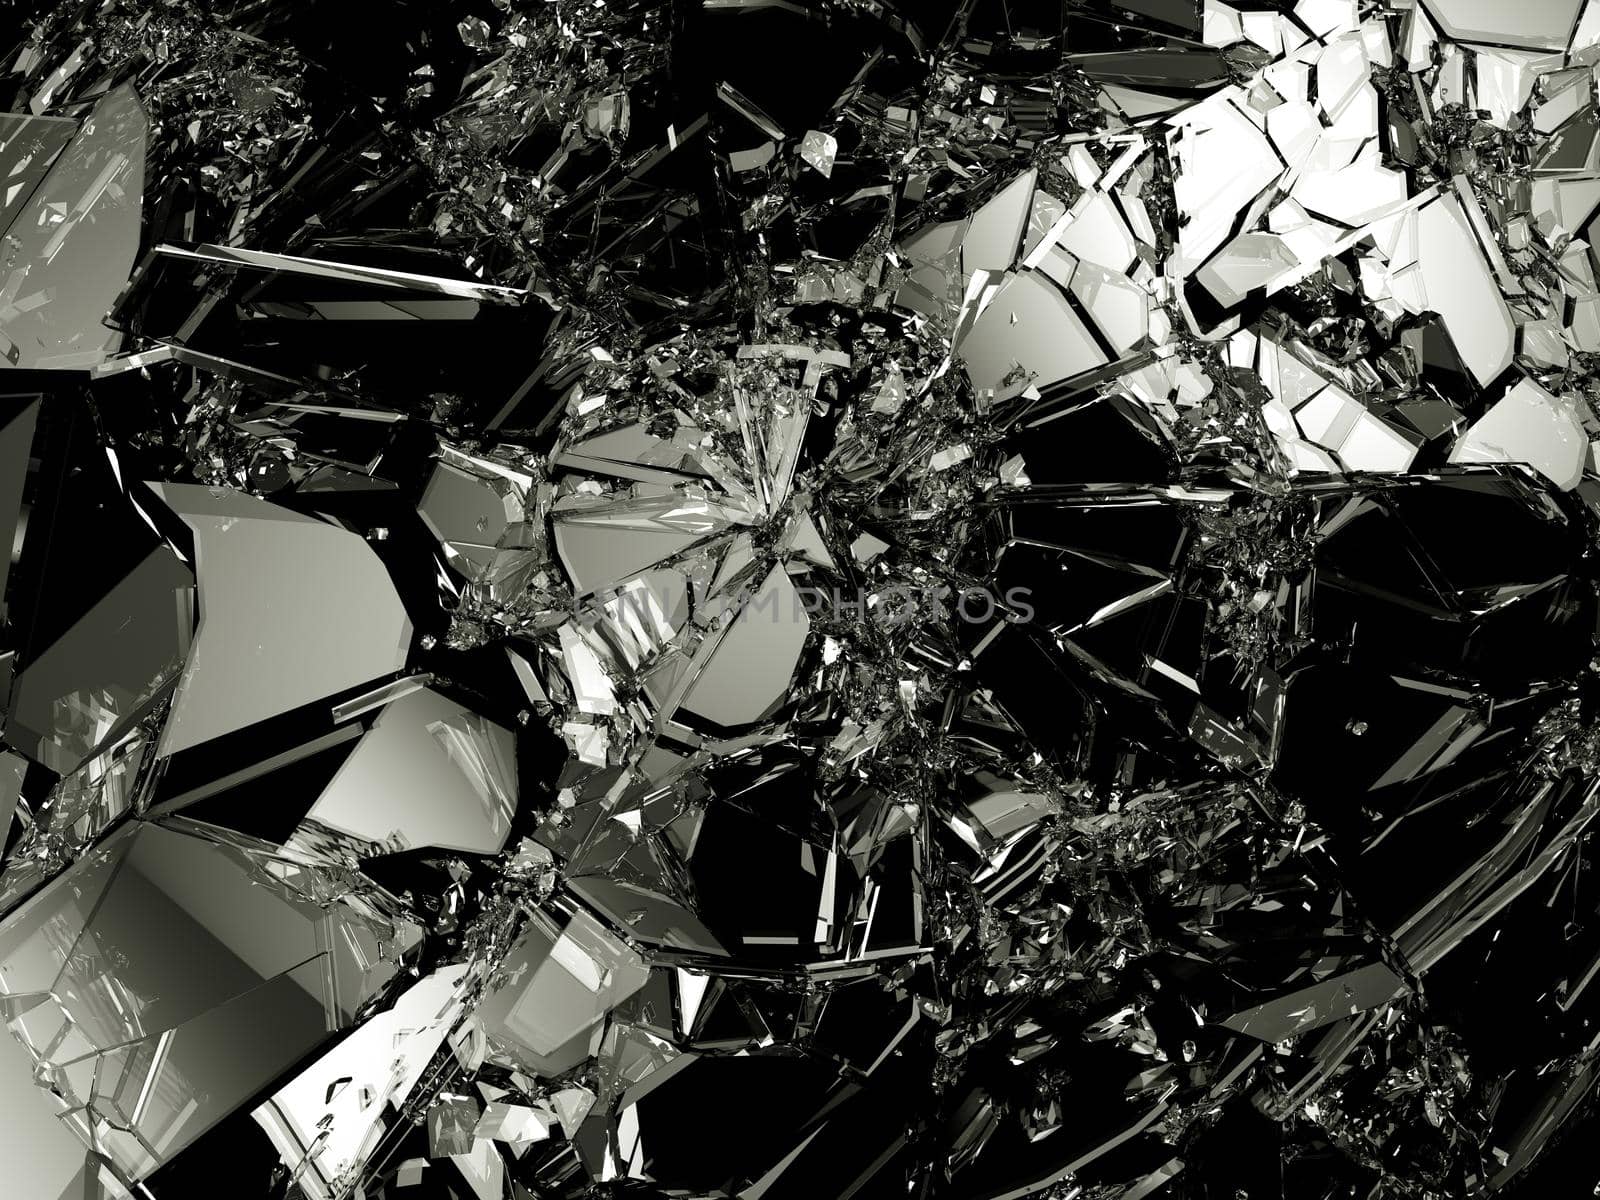 Shattered glass: sharp Pieces on black by Arsgera